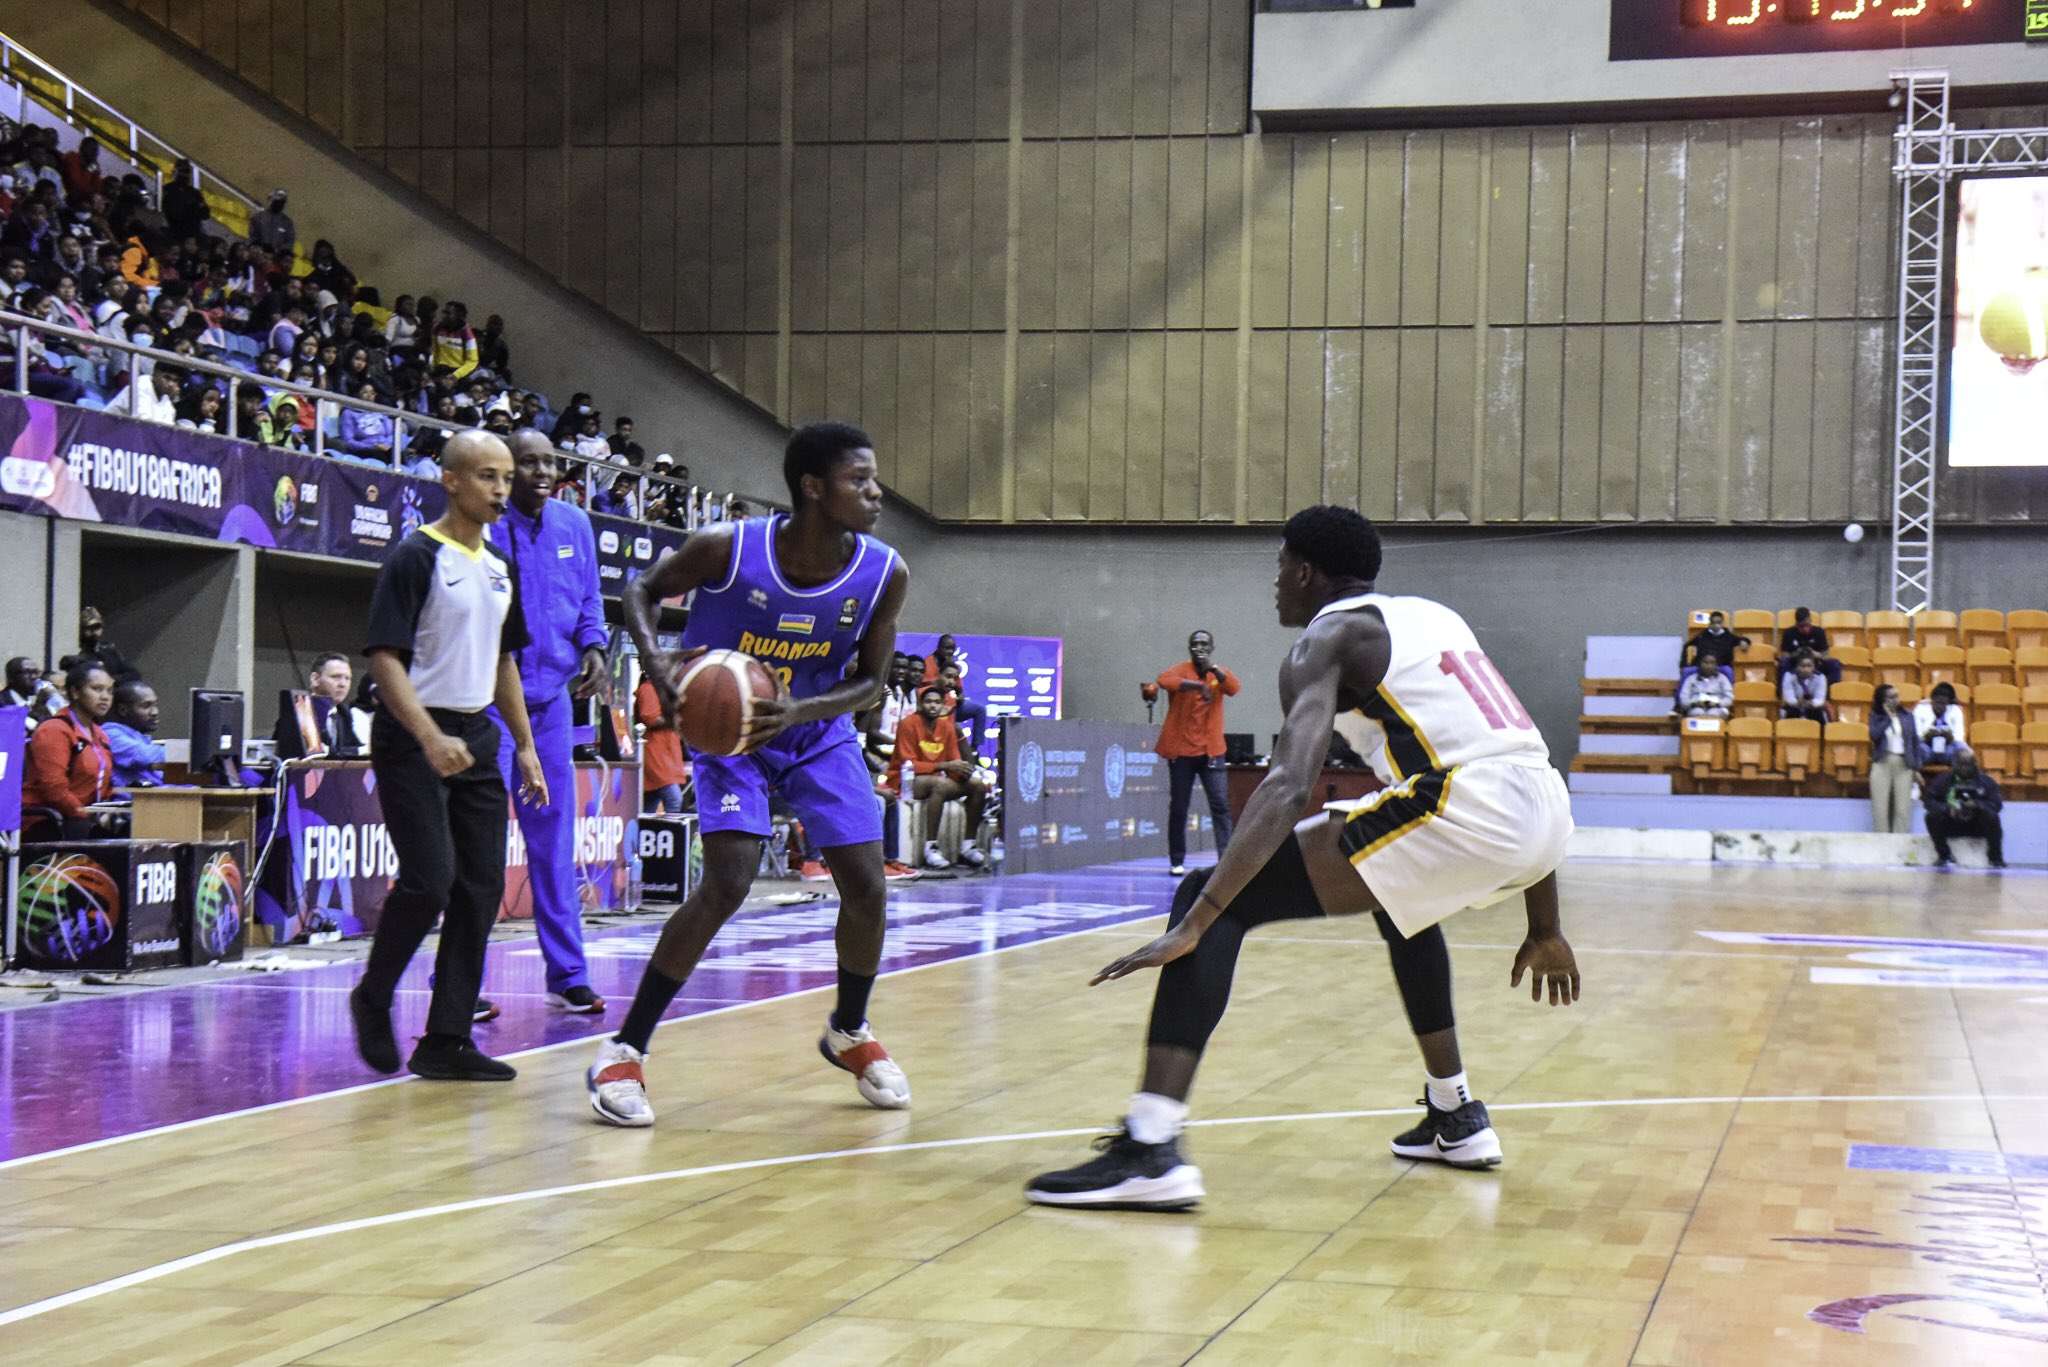 The Under-18 national basketball team during the game against Angola. The team finished the African Championships without registering a single win out of the four matches they played. Courtesy